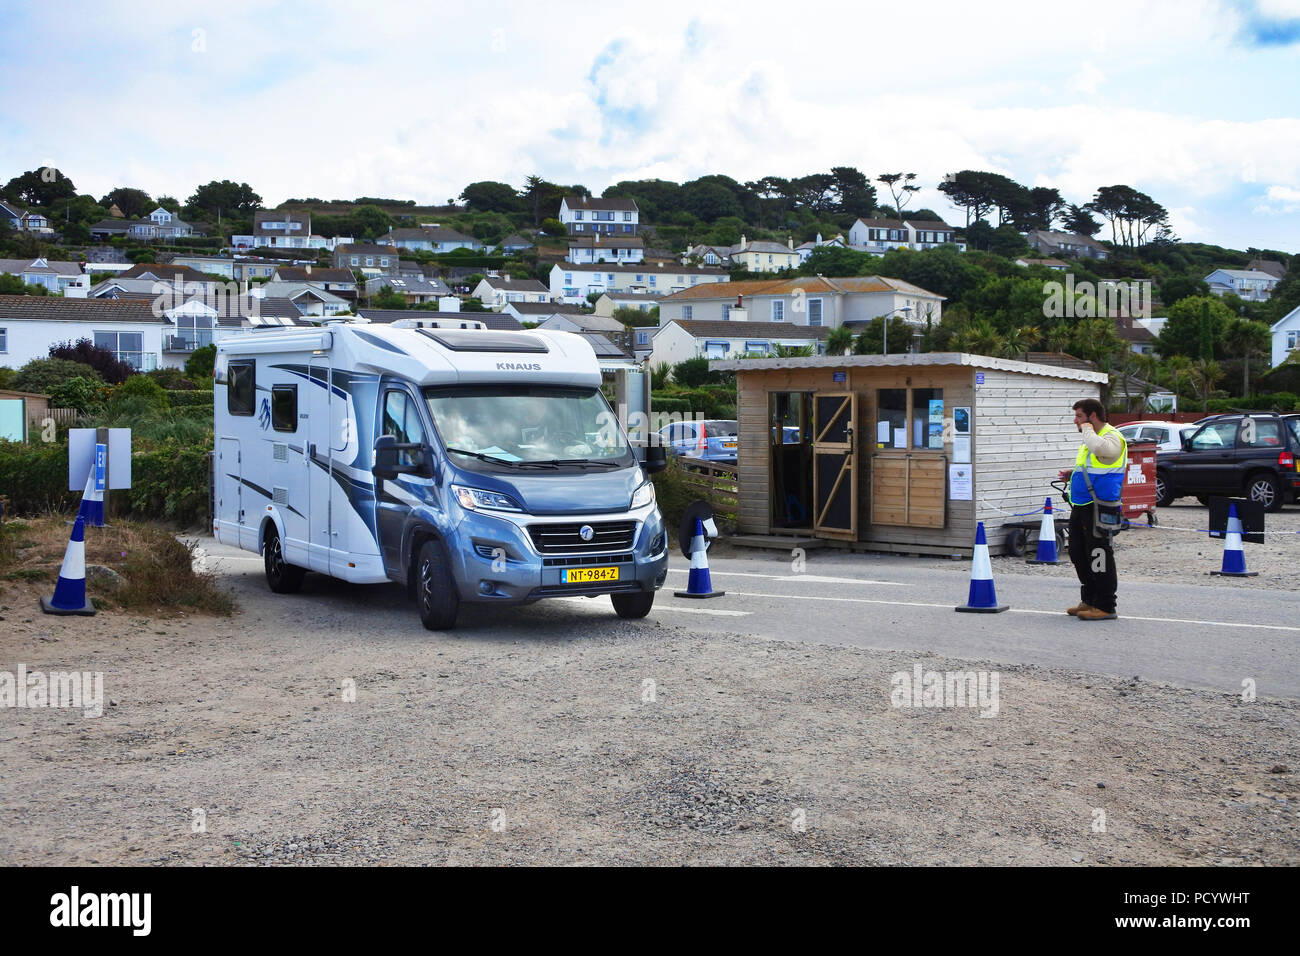 Car parkers collecting money at the entrance to the main St. Michael's Mount car park, Marazion, Cornwall, UK - John Gollop Stock Photo